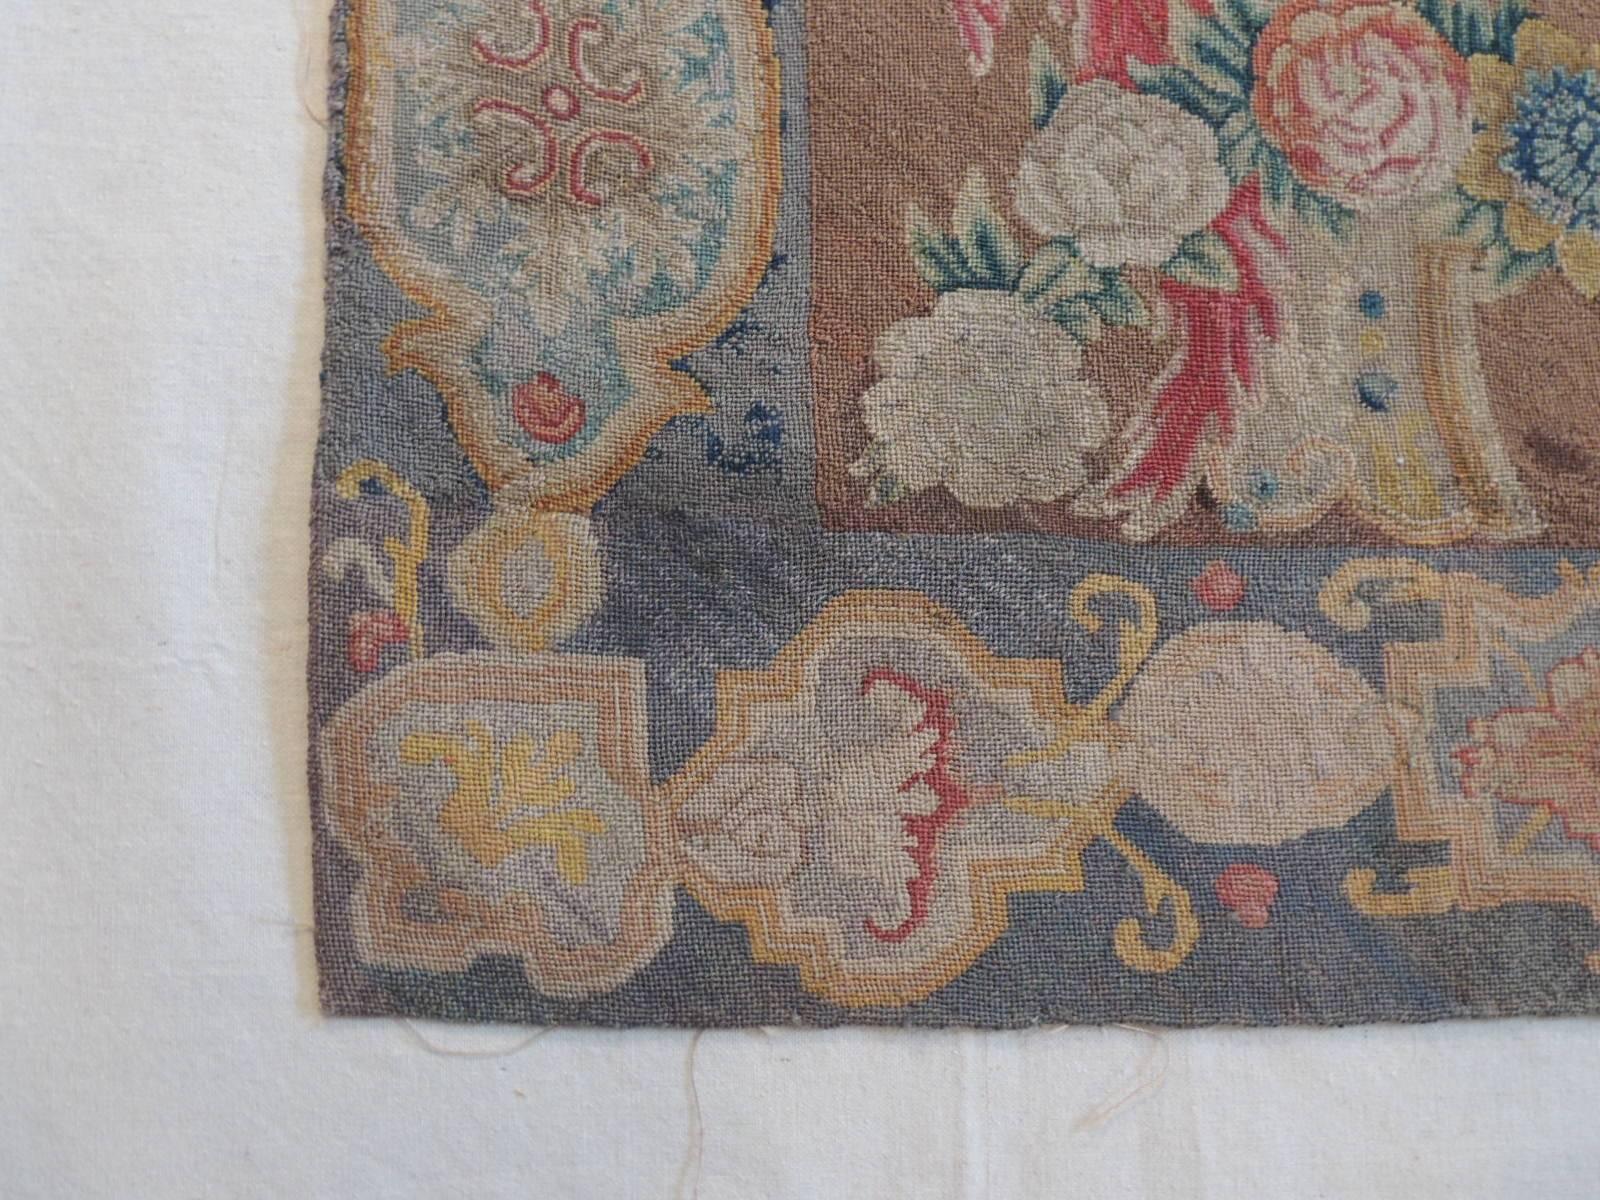 Offered by the Antique Textiles Galleries:
18th century Savonnerie fragment depicting a sea shell in the centre with naturalistic garlands and acanthus leaves on each side to recreate a pictorial medallion in the centre. “A famous rug and tapestry